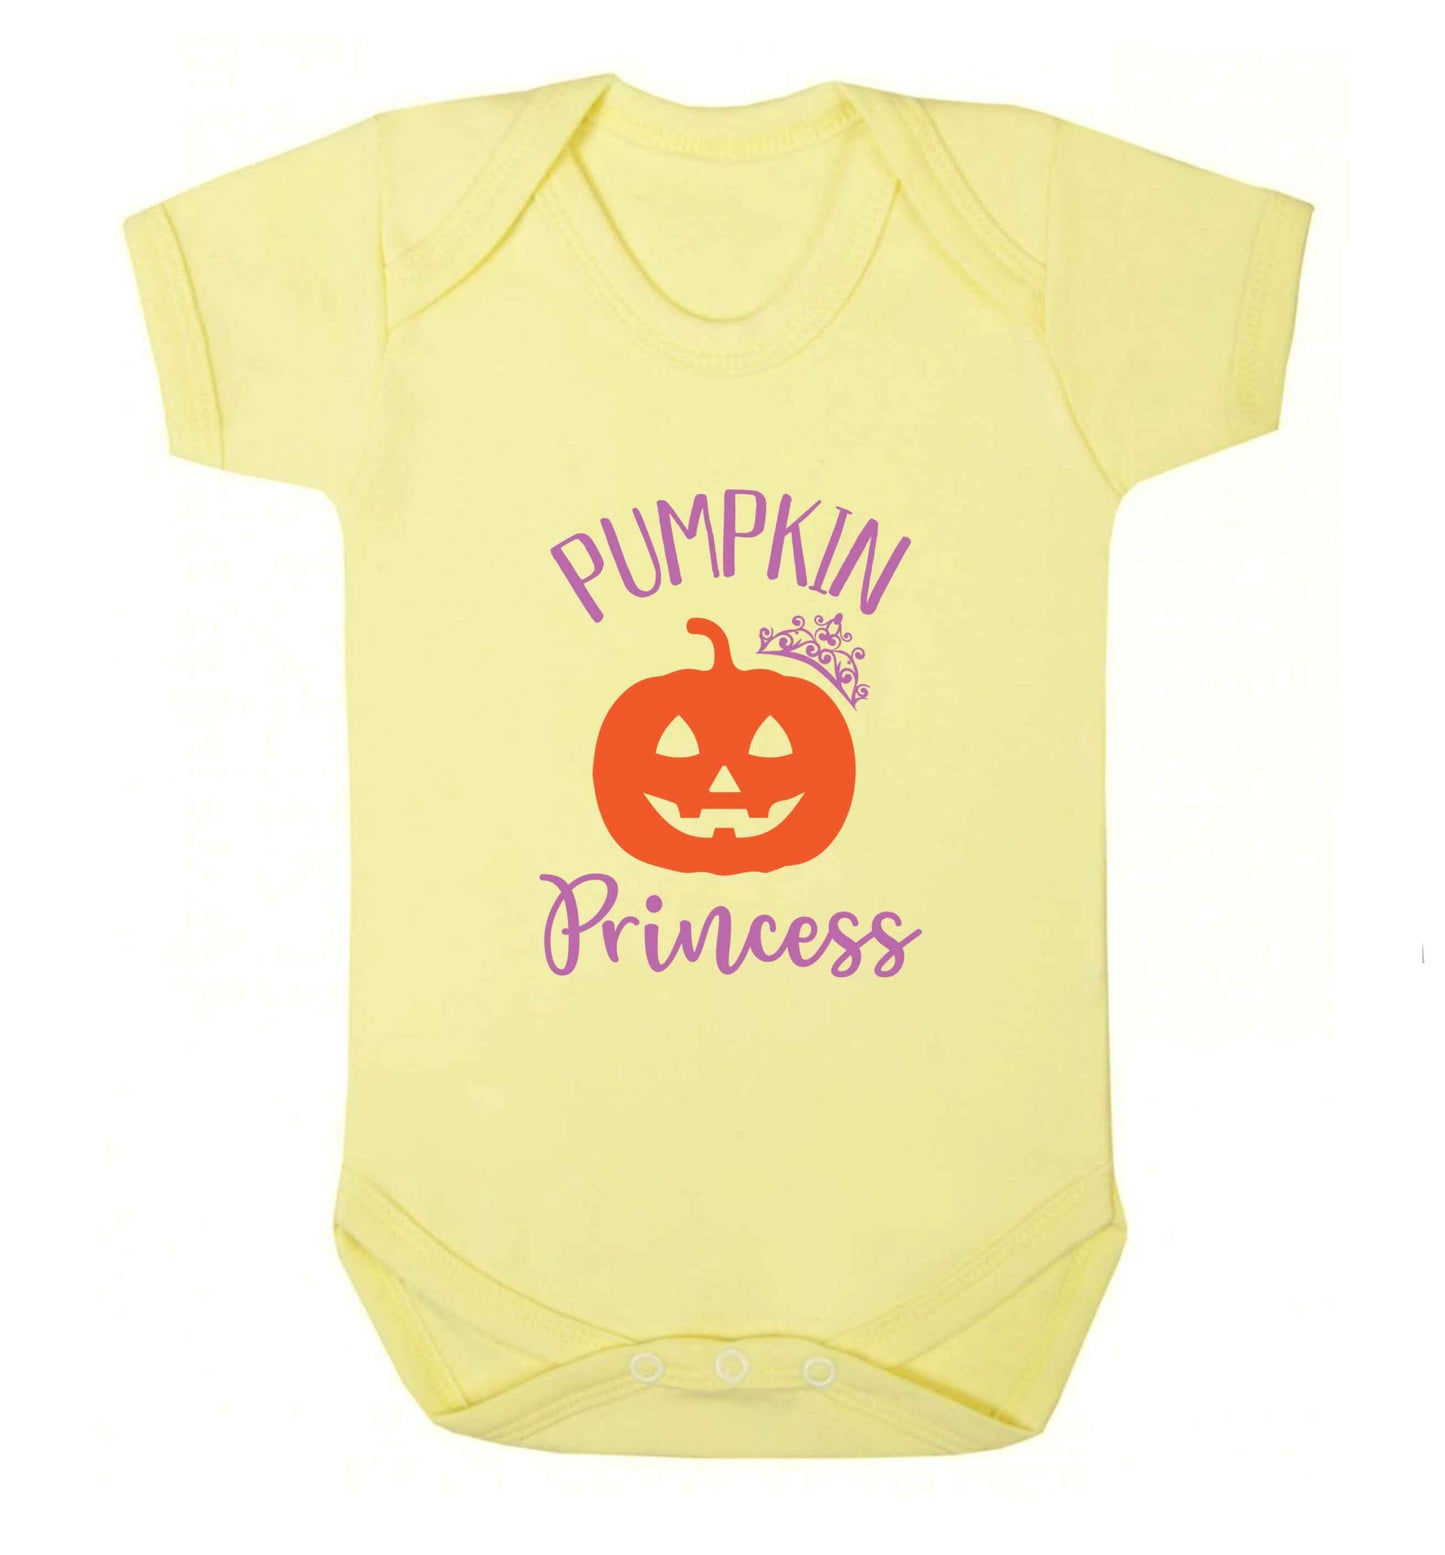 Happiness Pumpkin Spice baby vest pale yellow 18-24 months